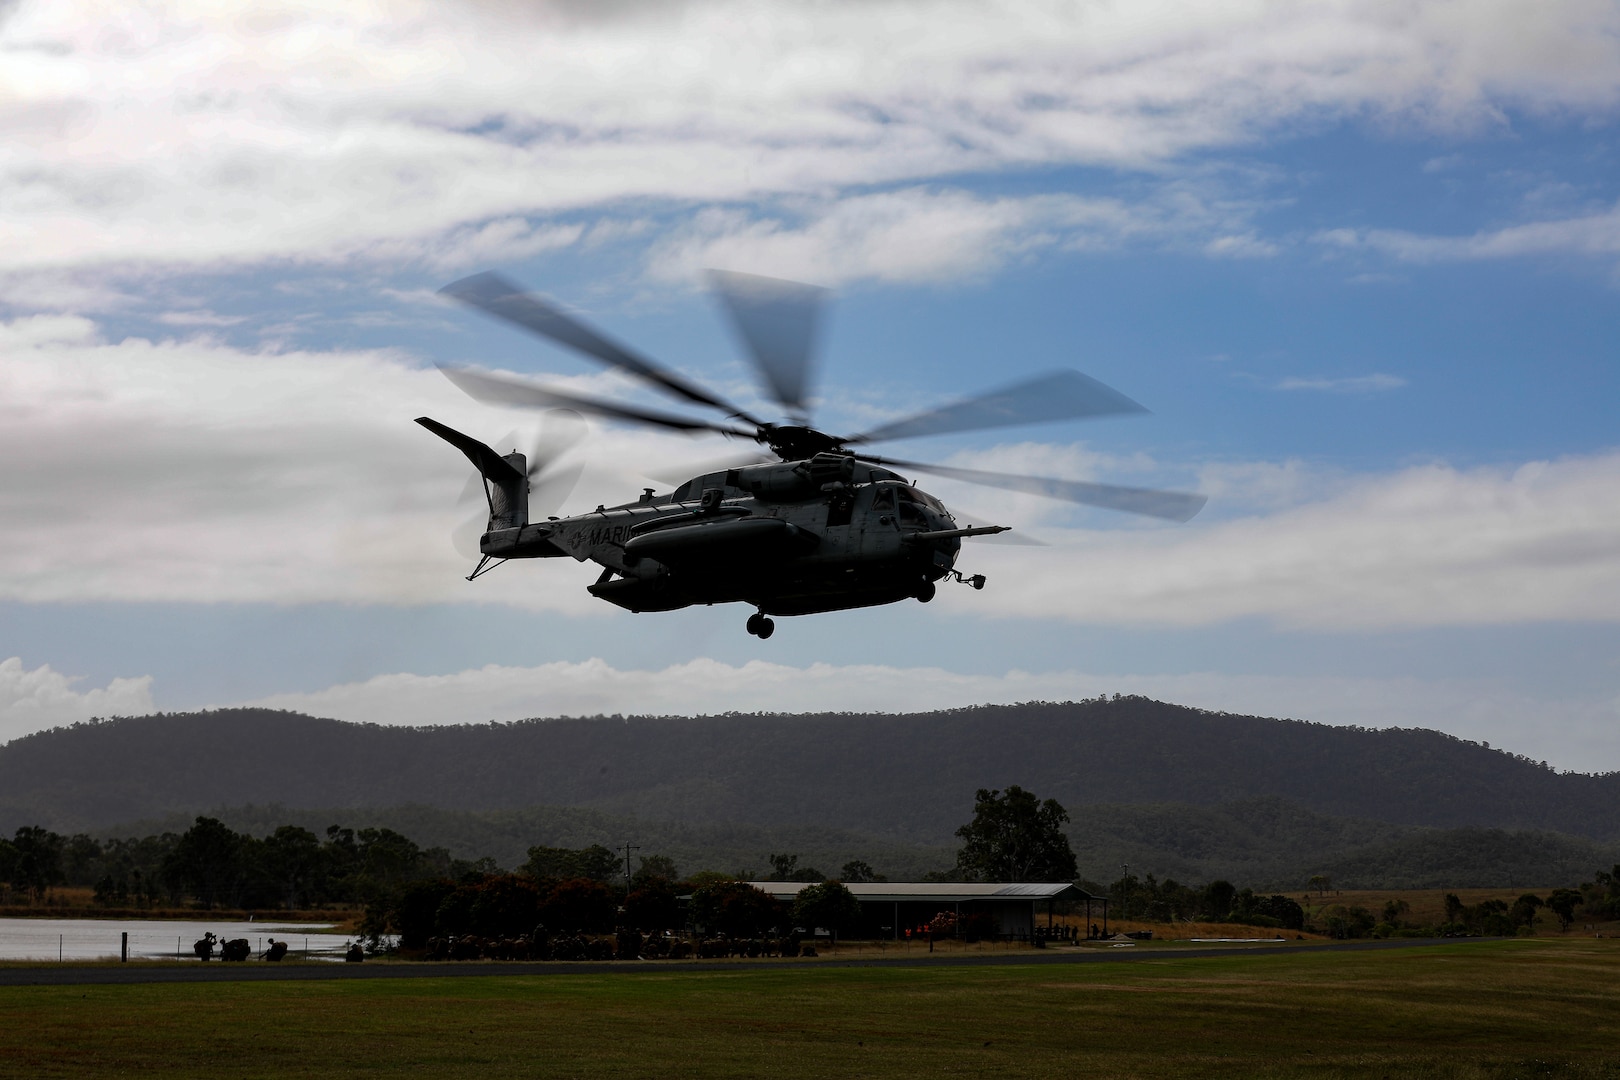 A U.S. Marine Corps CH-53D Sea Stallion takes off as a part of Talisman Sabre 23 in Midge Point, Australia July 25, 2023. TS23 allows 1st and 3d Marine Divisions and other elements of I and III Marine Expeditionary Forces to train closely with allies and joint partners to enhance our collective capabilities, readiness, and effectiveness in preparation for any crisis or contingency in the future. (U.S. Army Photo by Staff Sgt. Jessica Elbouab)